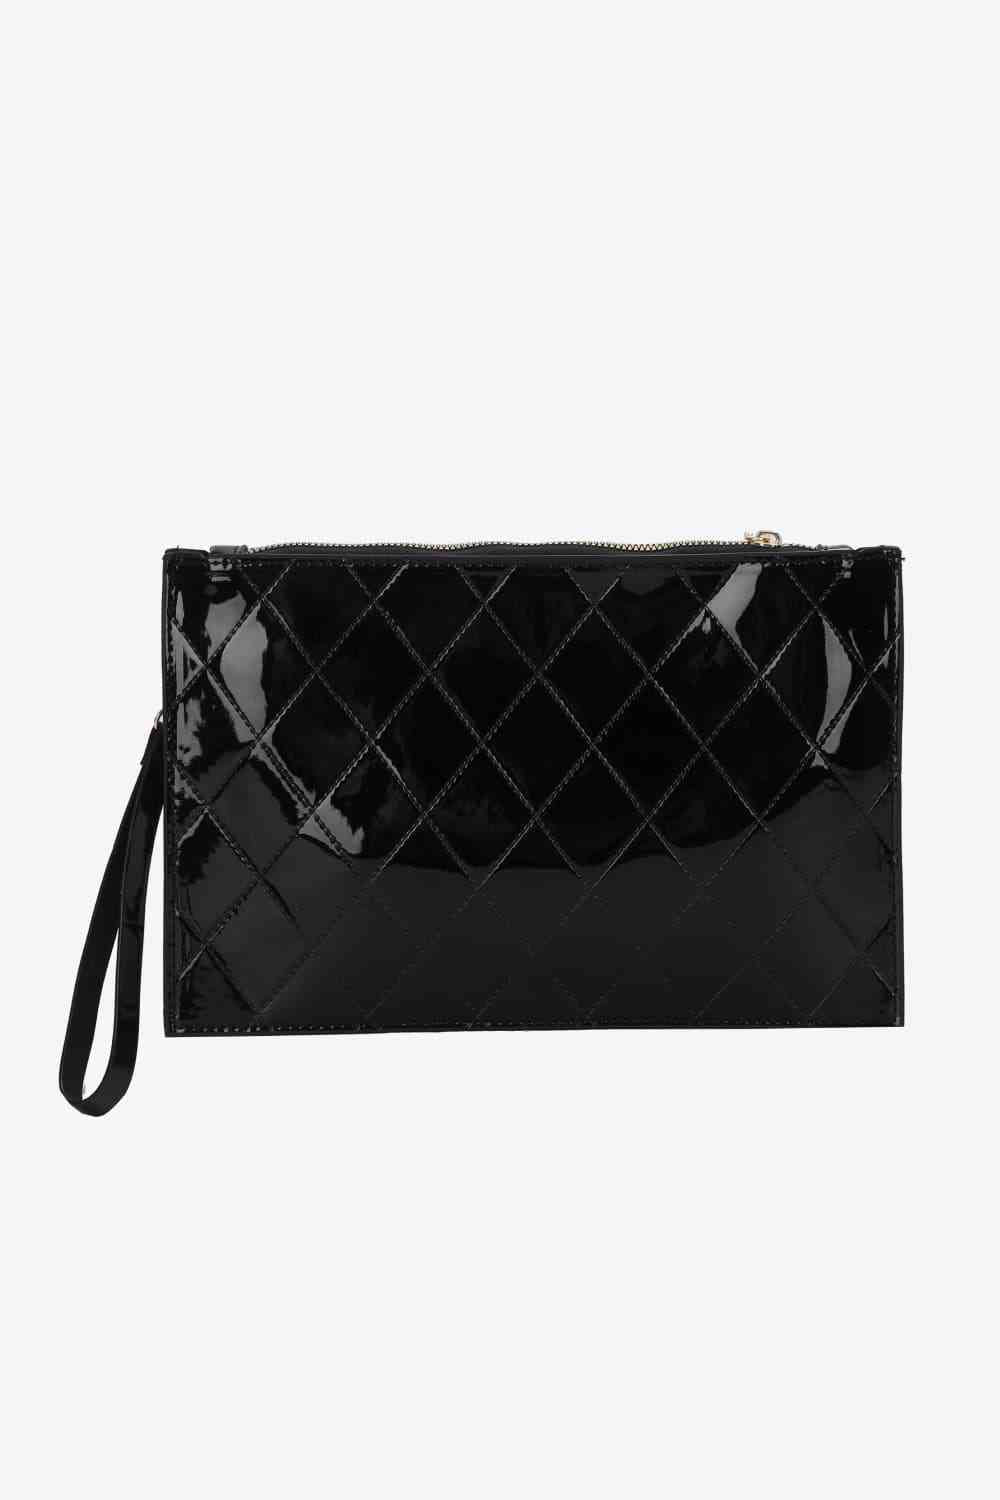 PU Leather Wristlet Bag - Black / One Size - All Products - Handbags - 9 - 2024